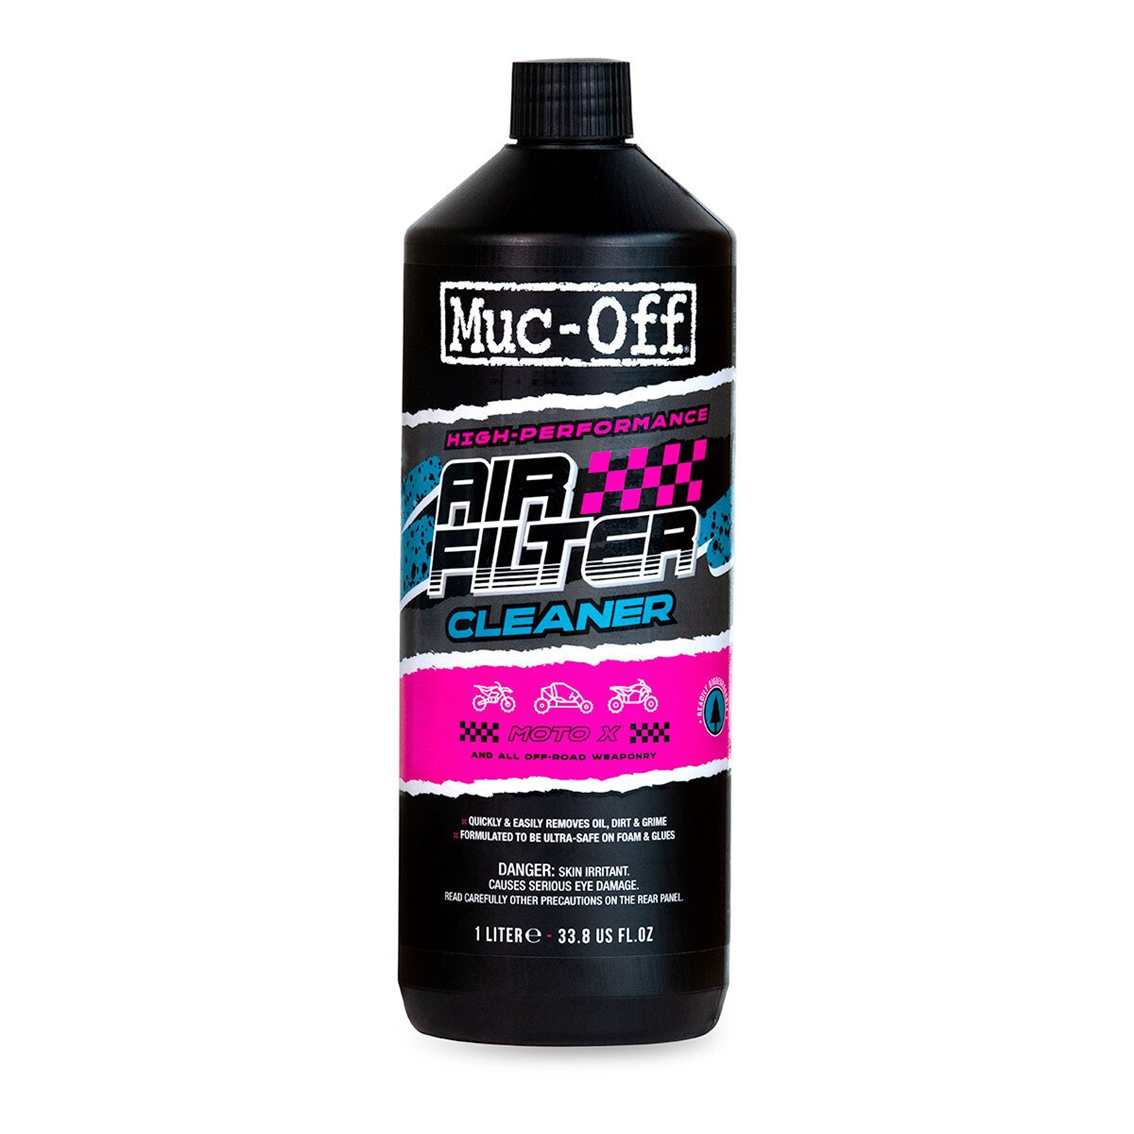 Muc-Off Motorcycle Air filter cleaner